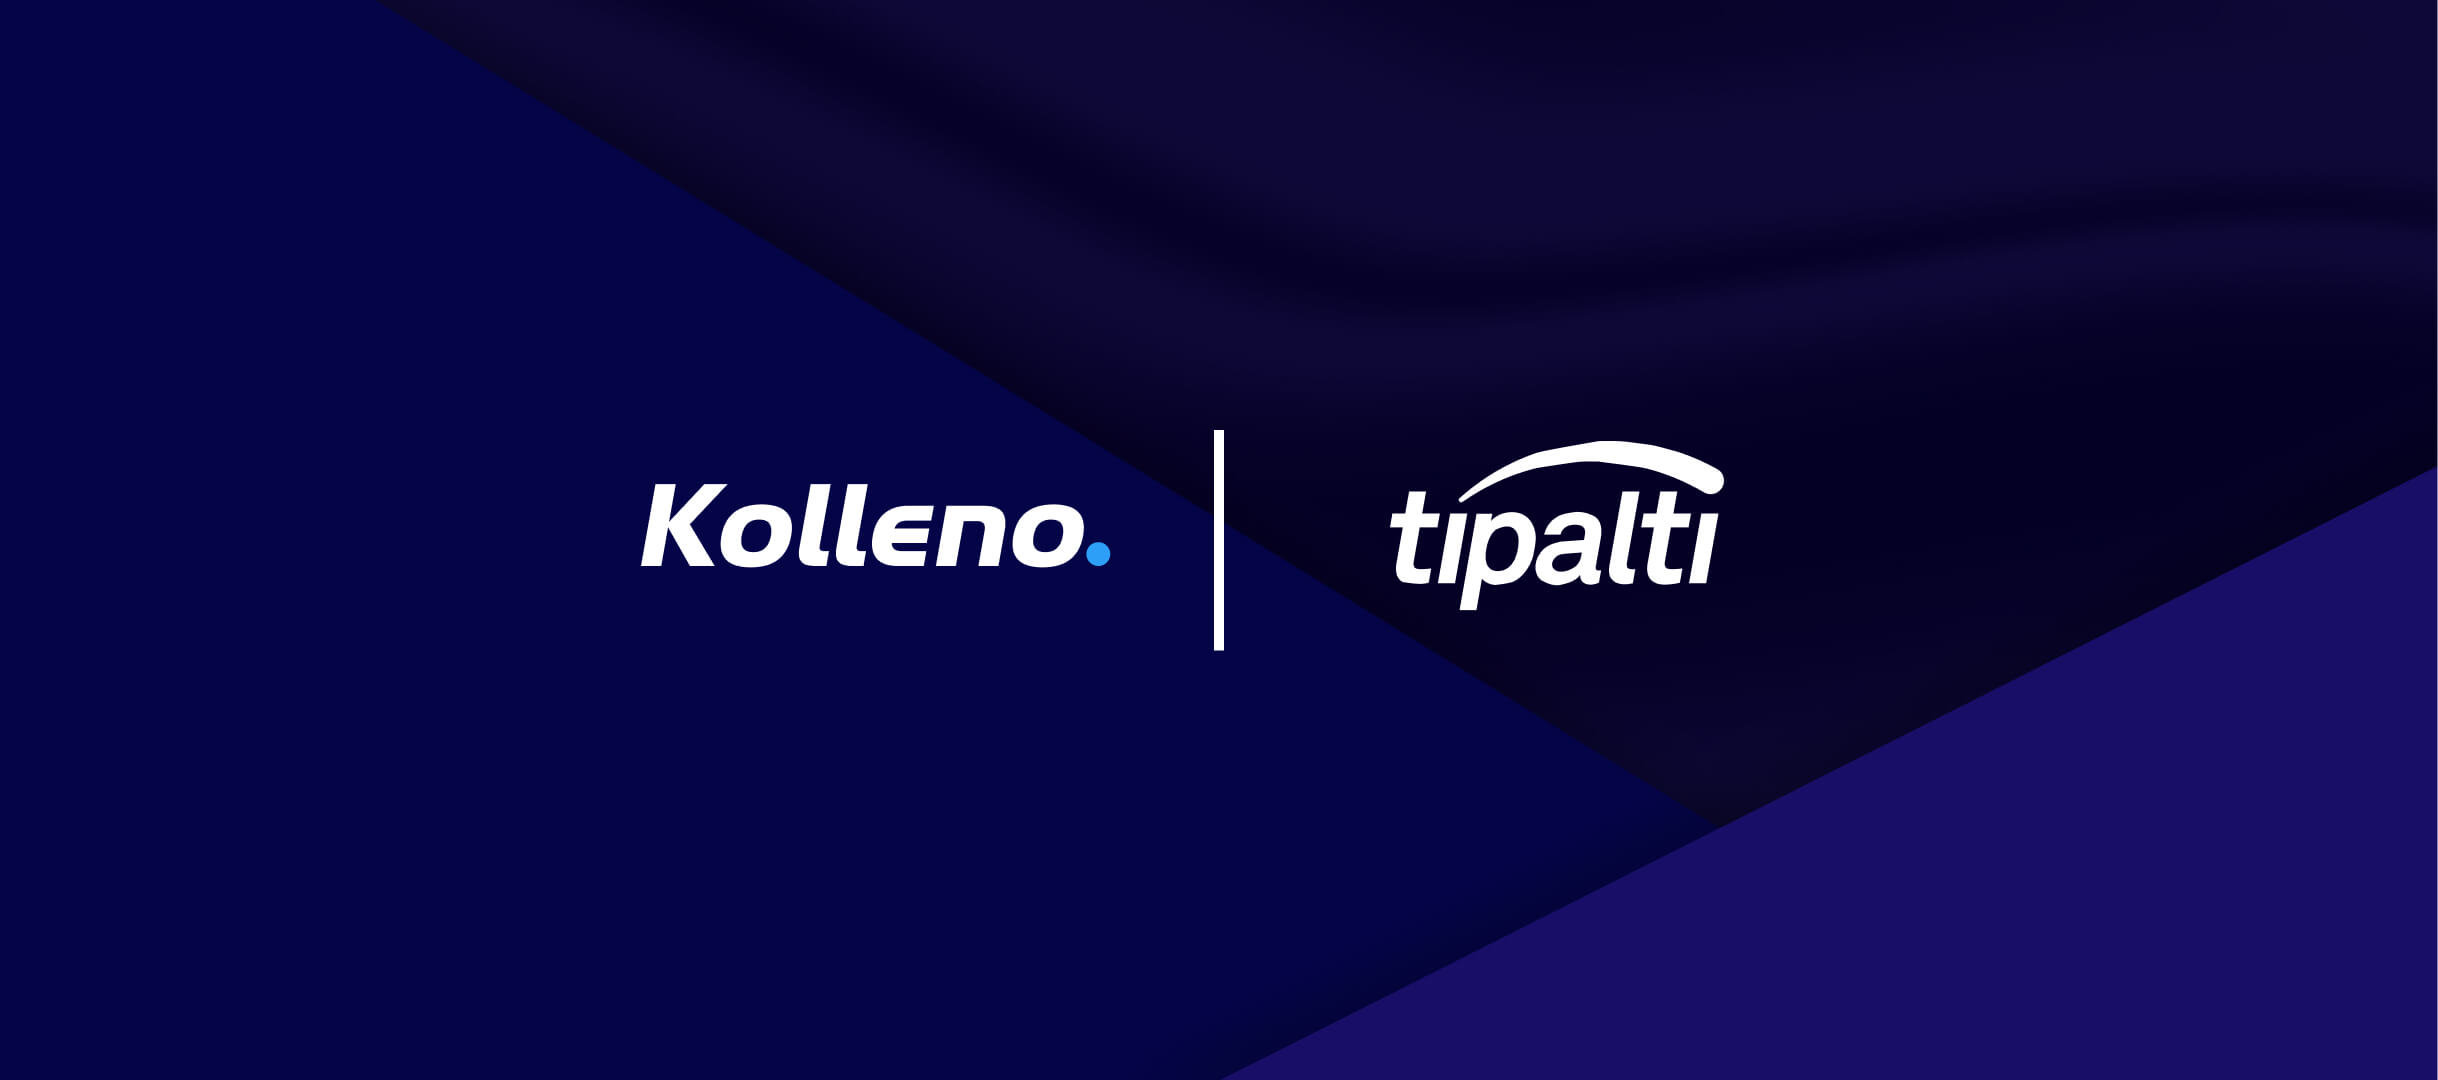 Kolleno partners with Tipalti, the global finance automation solution provider